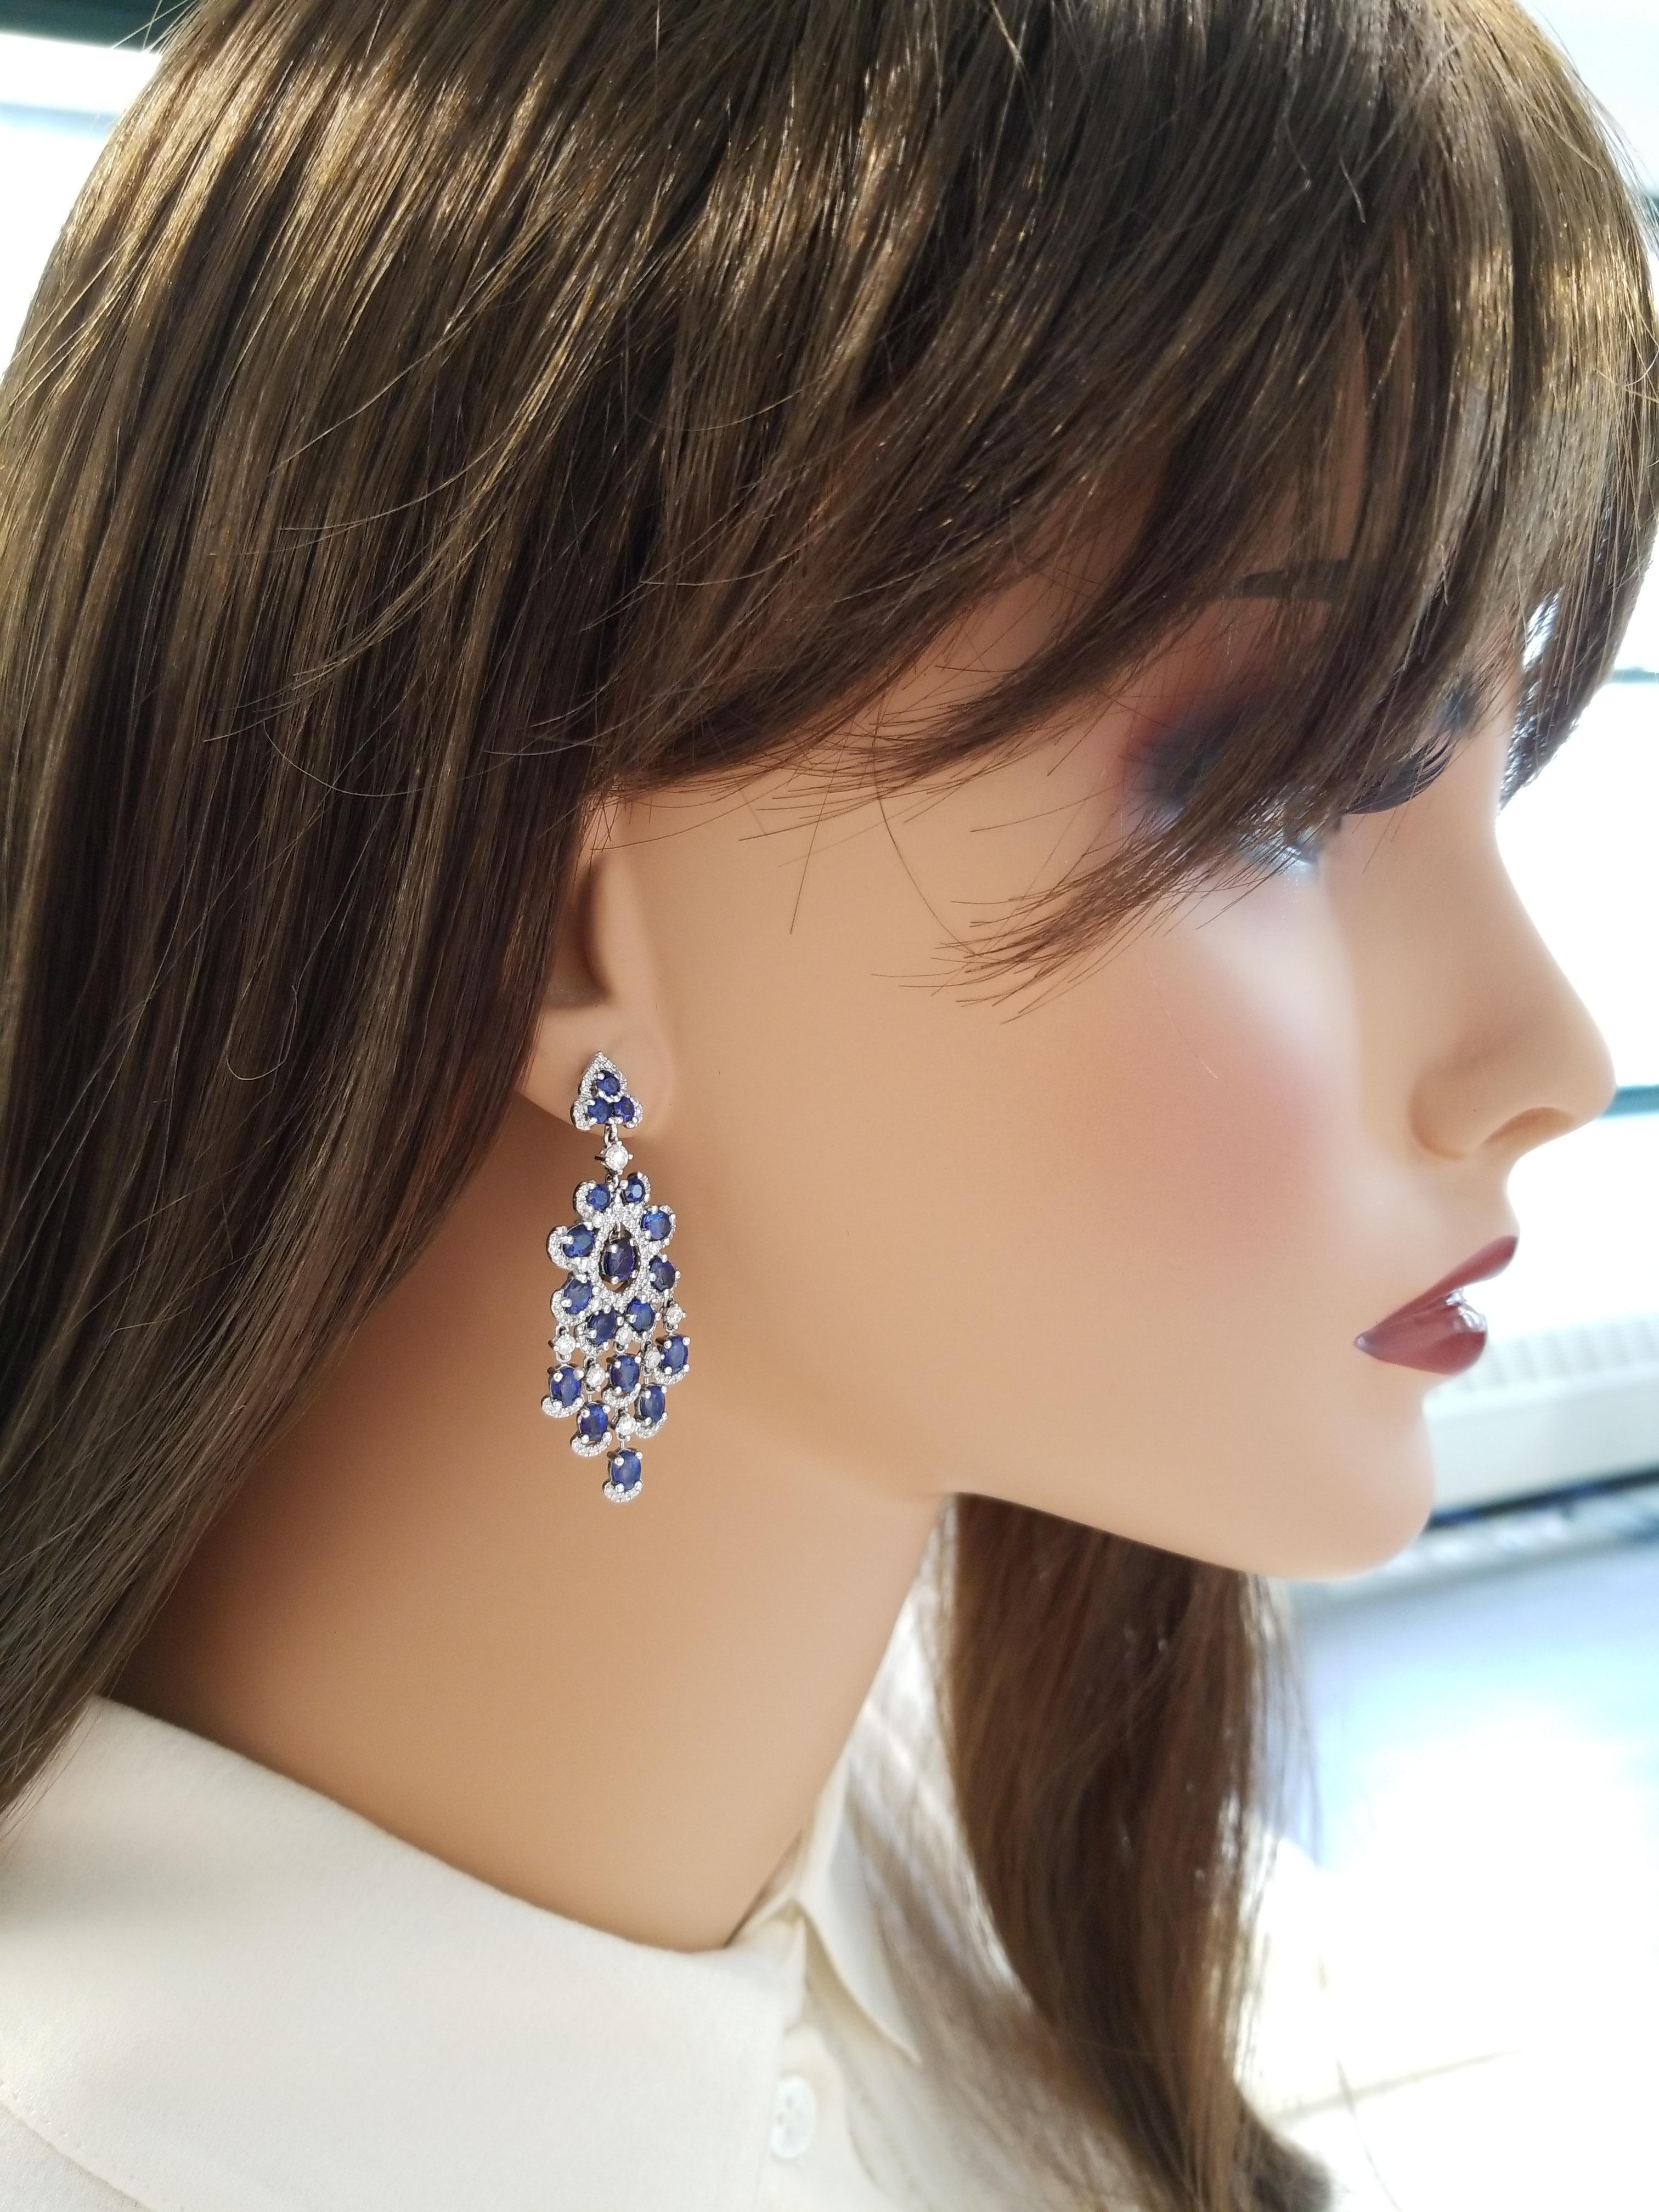 If you are looking for top-end gem chandelier earrings, your search is over. These earrings are fine and delicate. 36 oval blue sapphires adorn these earrings totaling 6.71 carats. The gem source is Thailand; perfectly matched and calibrated, the